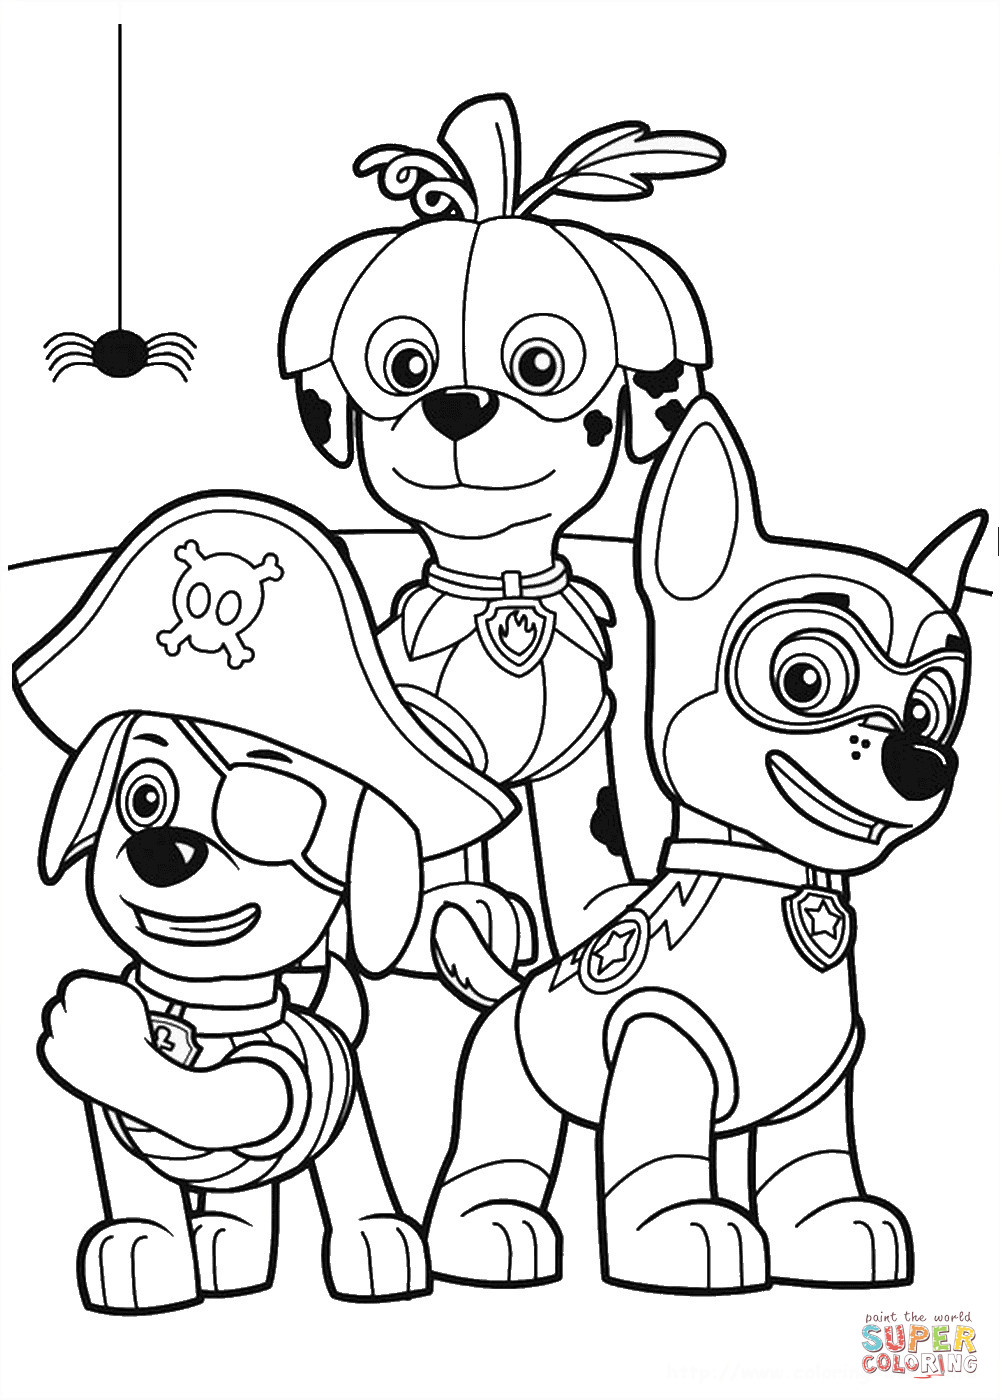 Printable Coloring Pages Paw Patrol
 Paw Patrol Halloween Party coloring page